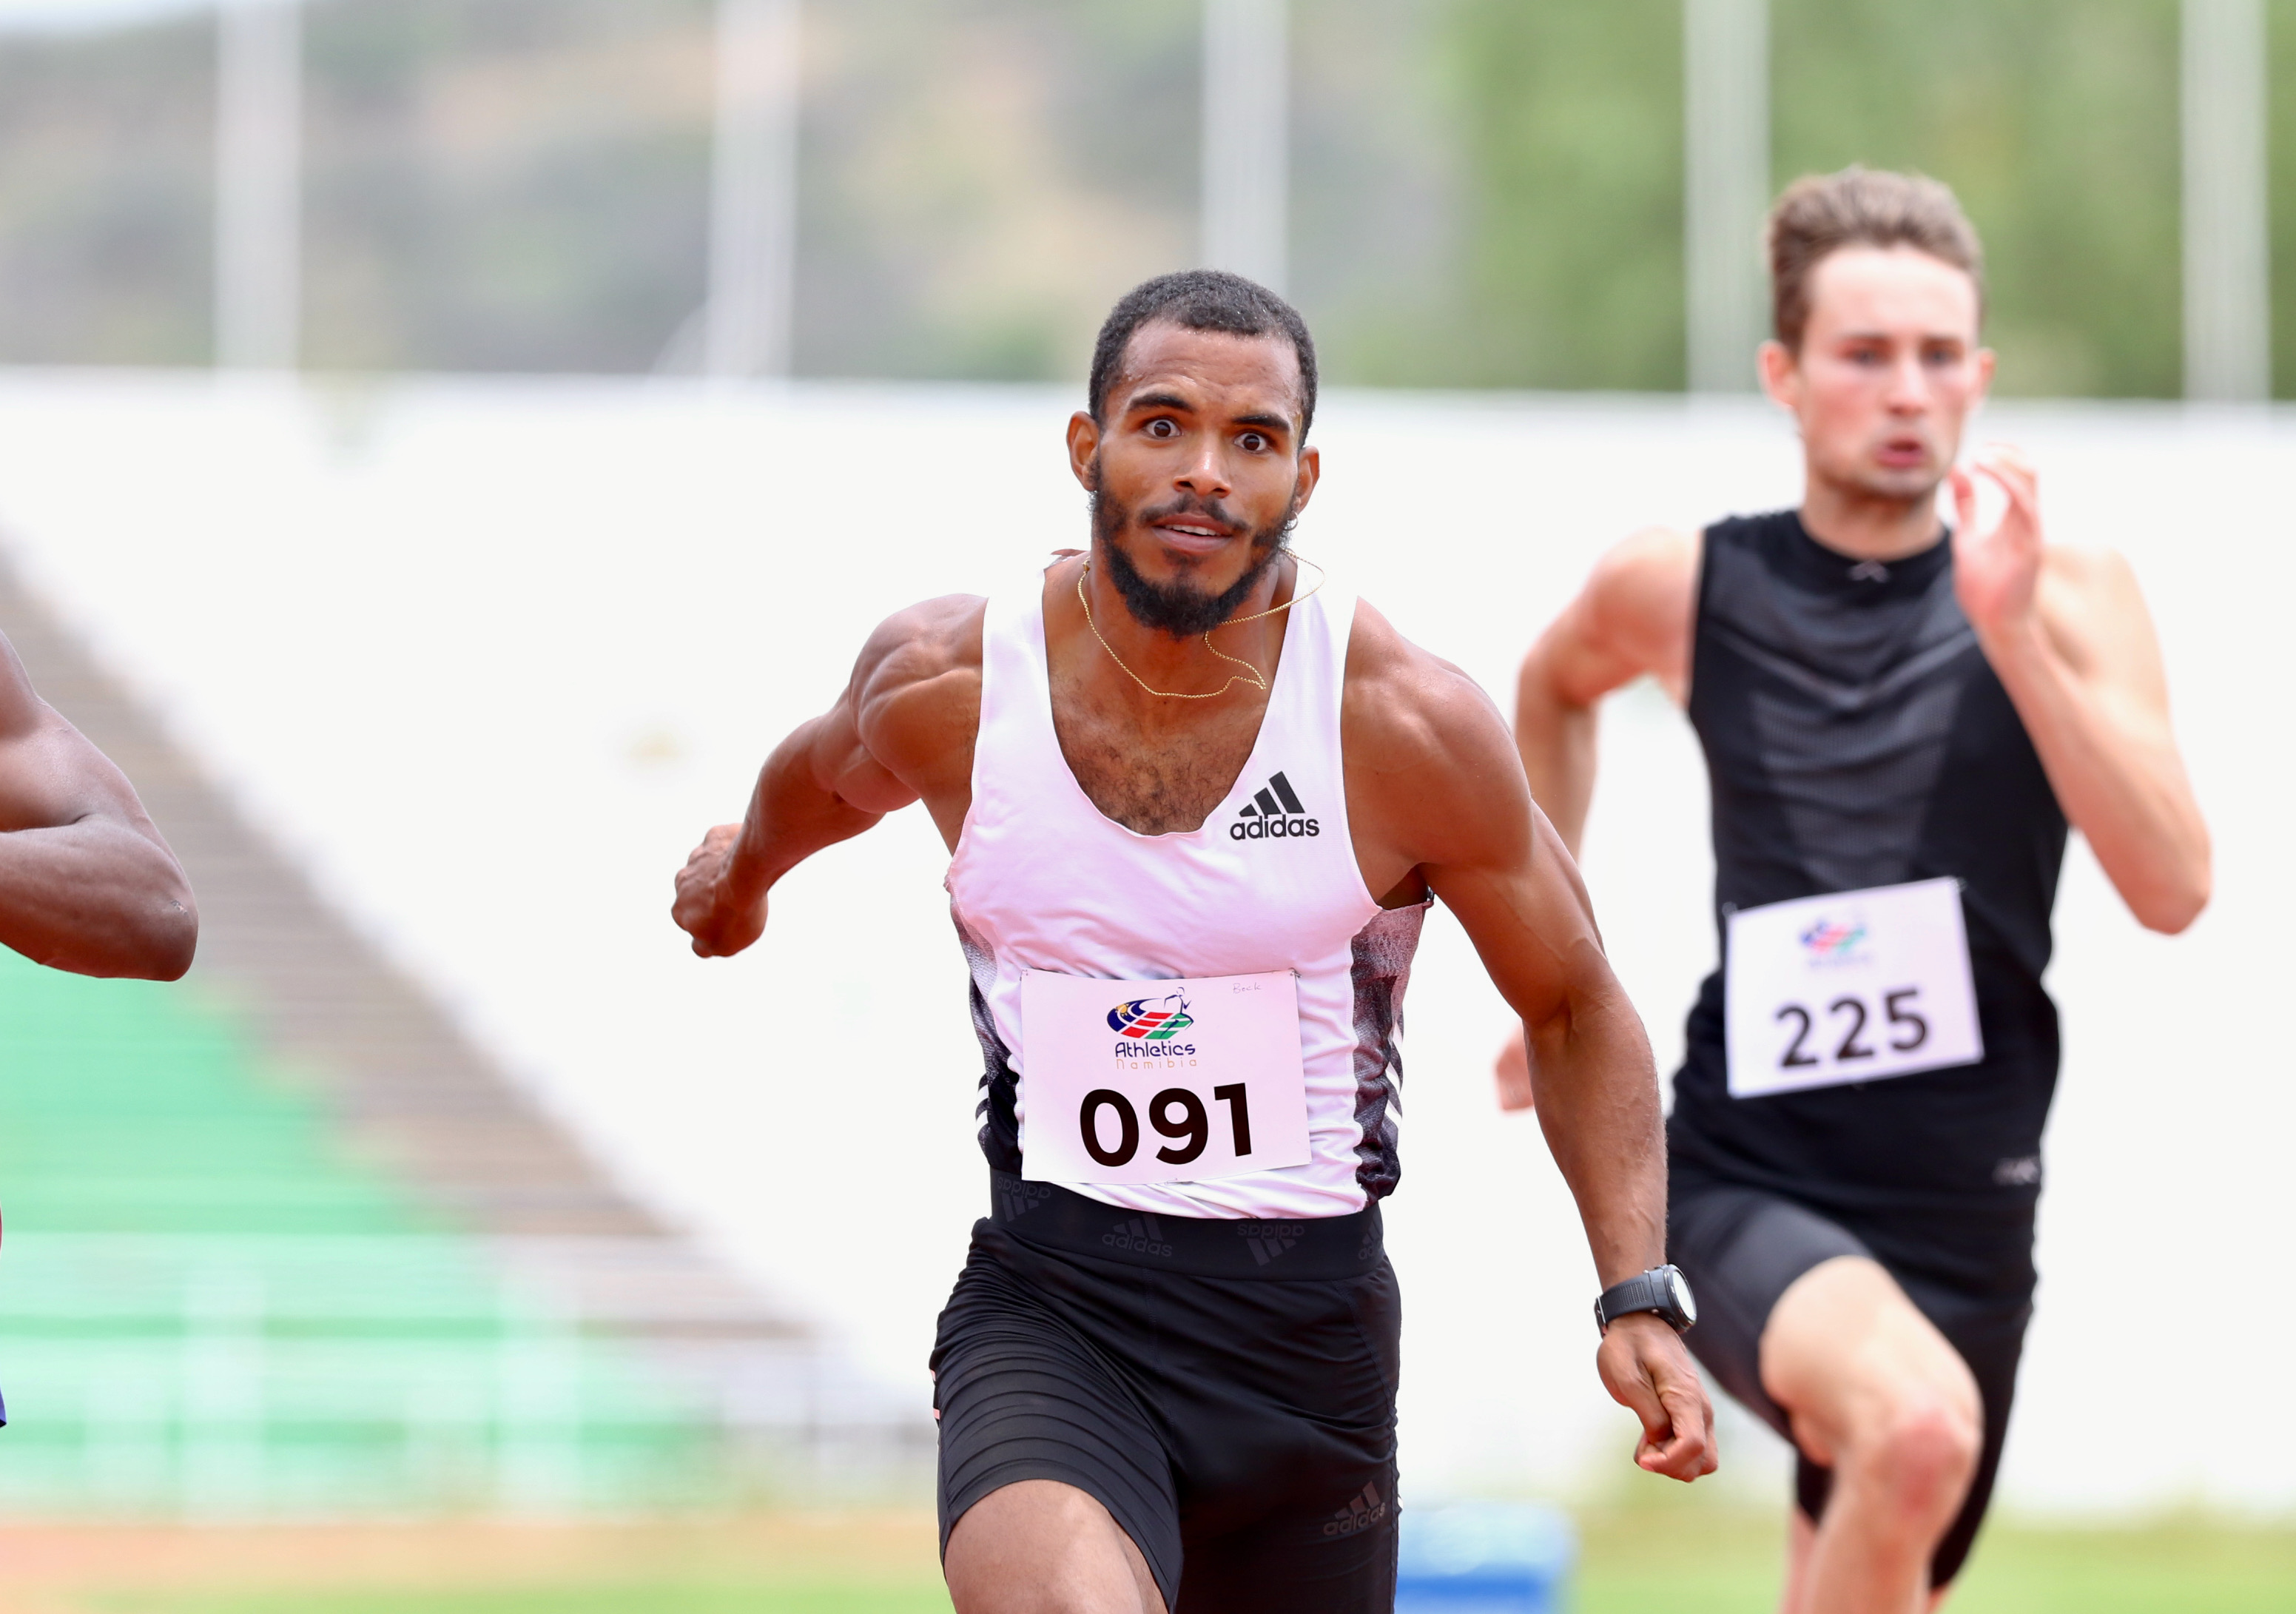 Stiff competition expected at athletics champs